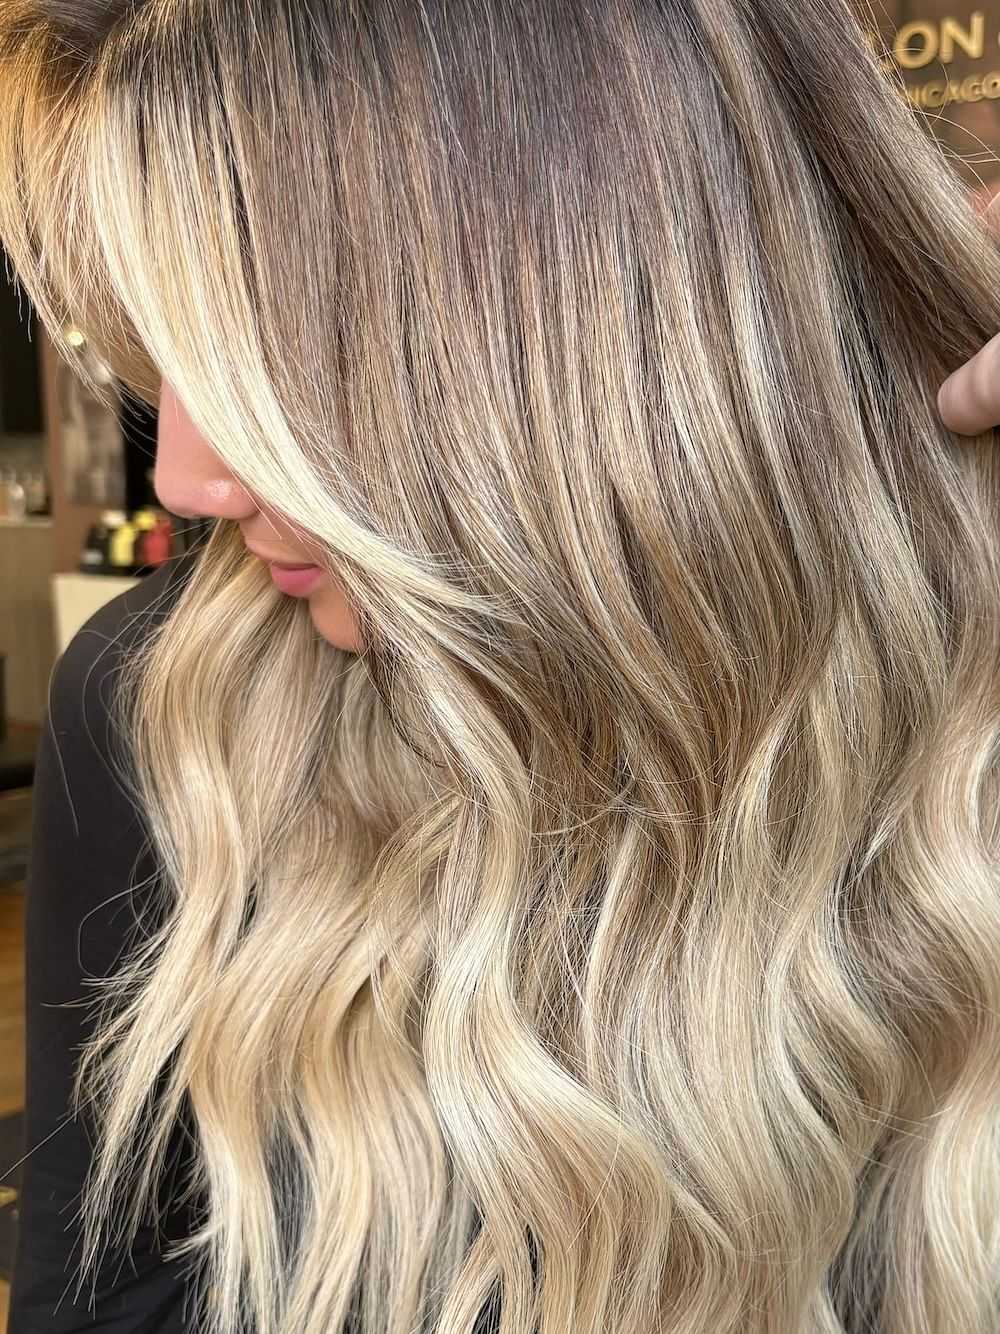 A close-up of beautifully highlighted wavy blonde hair.